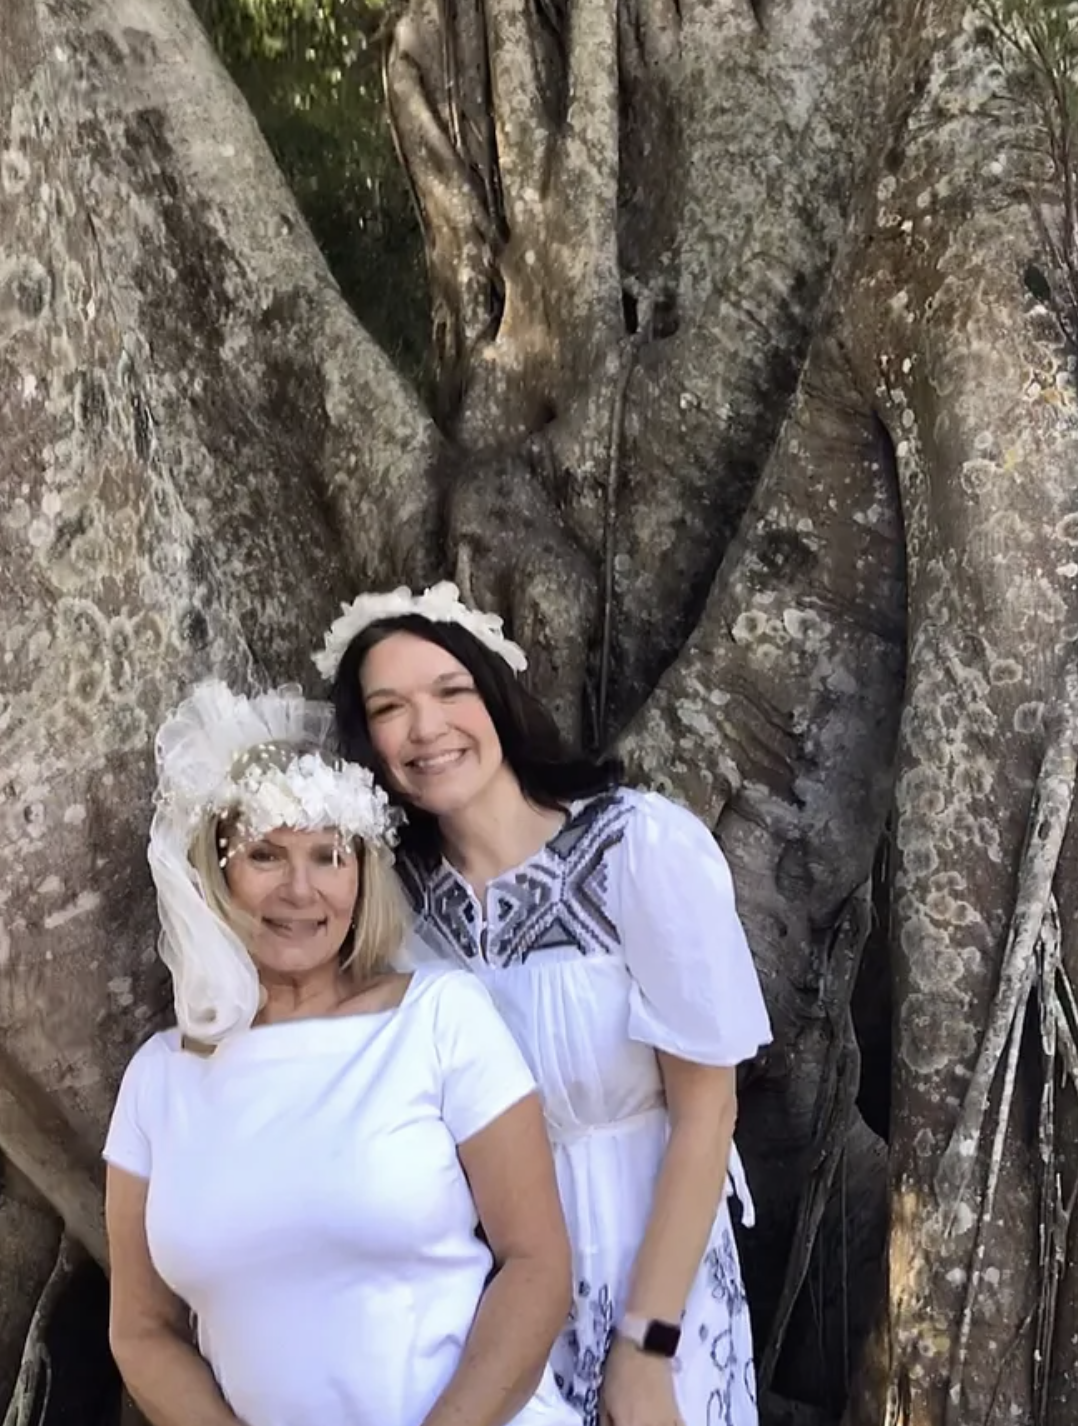 While we all have a favorite tree in our community, Karen Cooper went to romantic lengths to rescue a 100-year-old ficus from being cut down in her native Fort Myers Florida, marrying the beloved tree back in 2018.  "When I heard the city was planning to cut it down, I was like, 'I don’t think so,'" she told ABC News of her wedding.  "I'm just having fun with something very serious."